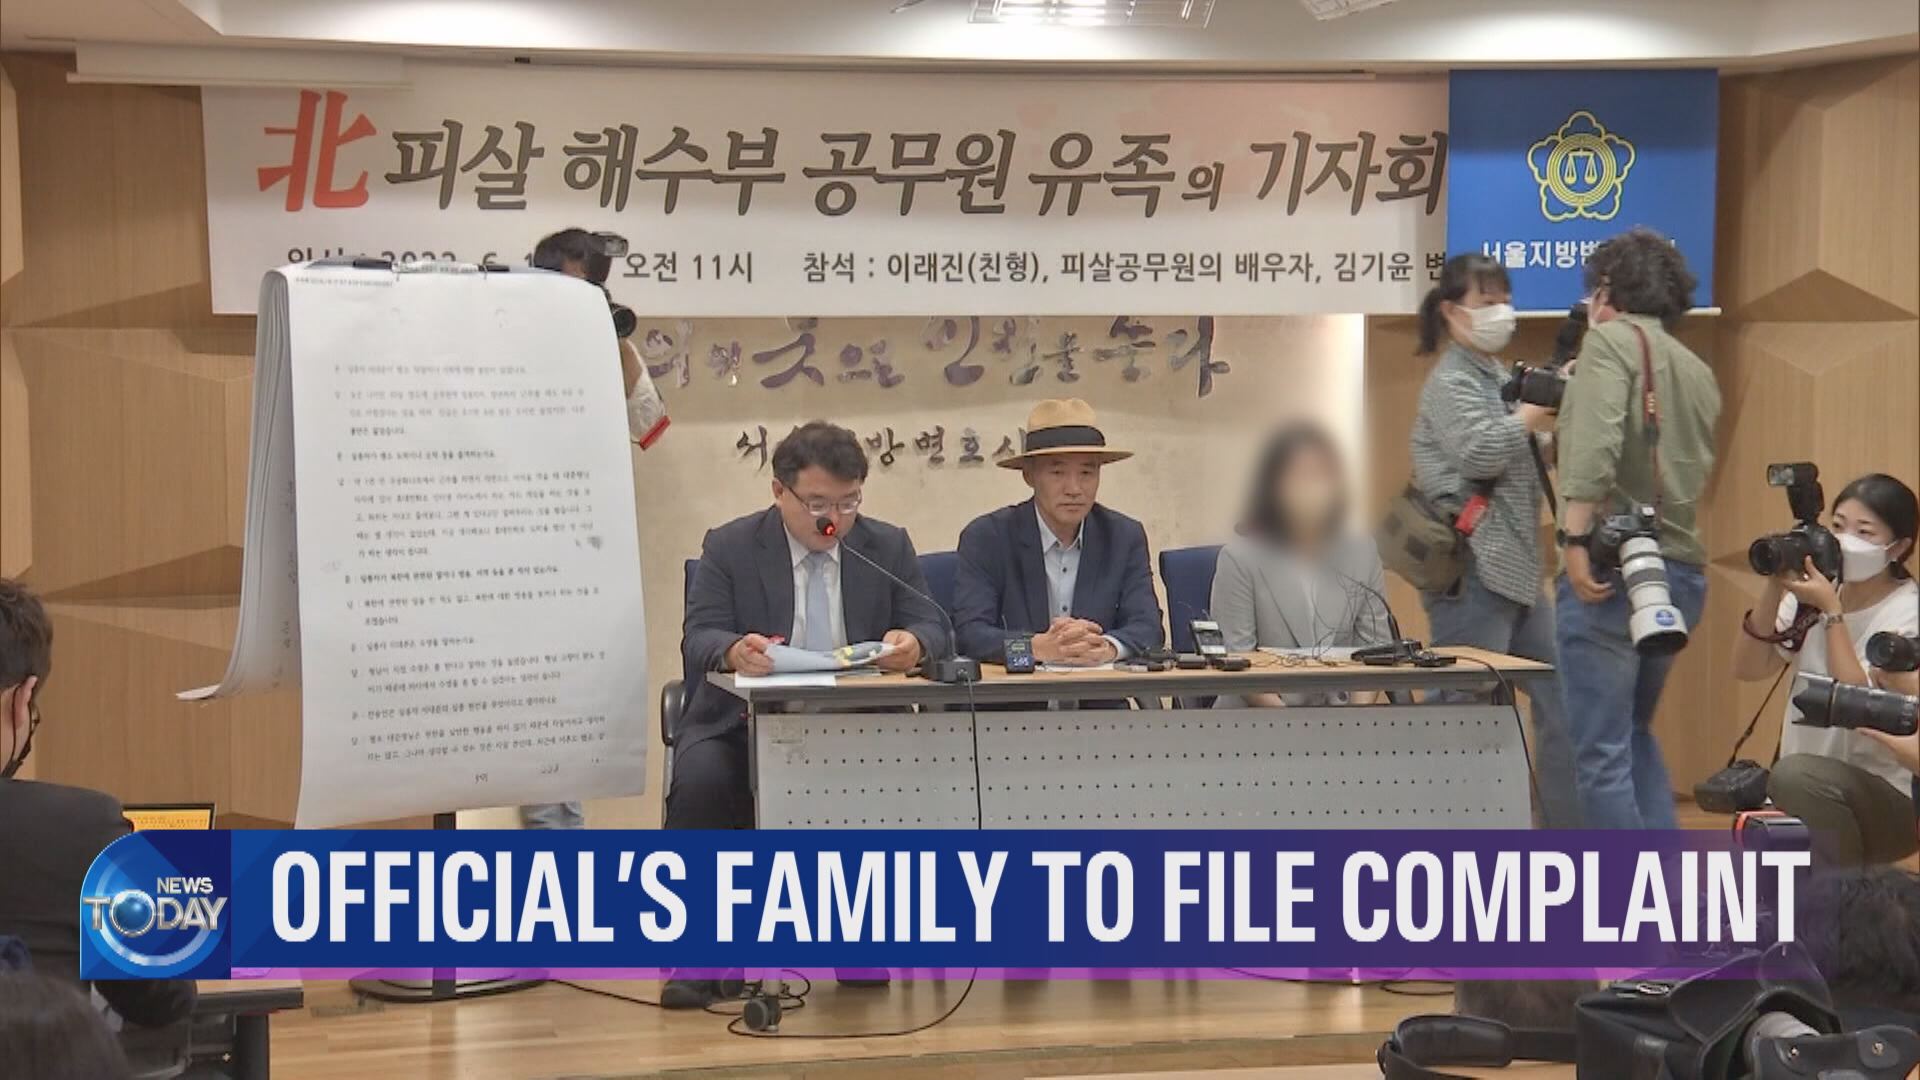 OFFICIAL'S FAMILY TO FILE COMPLAINT